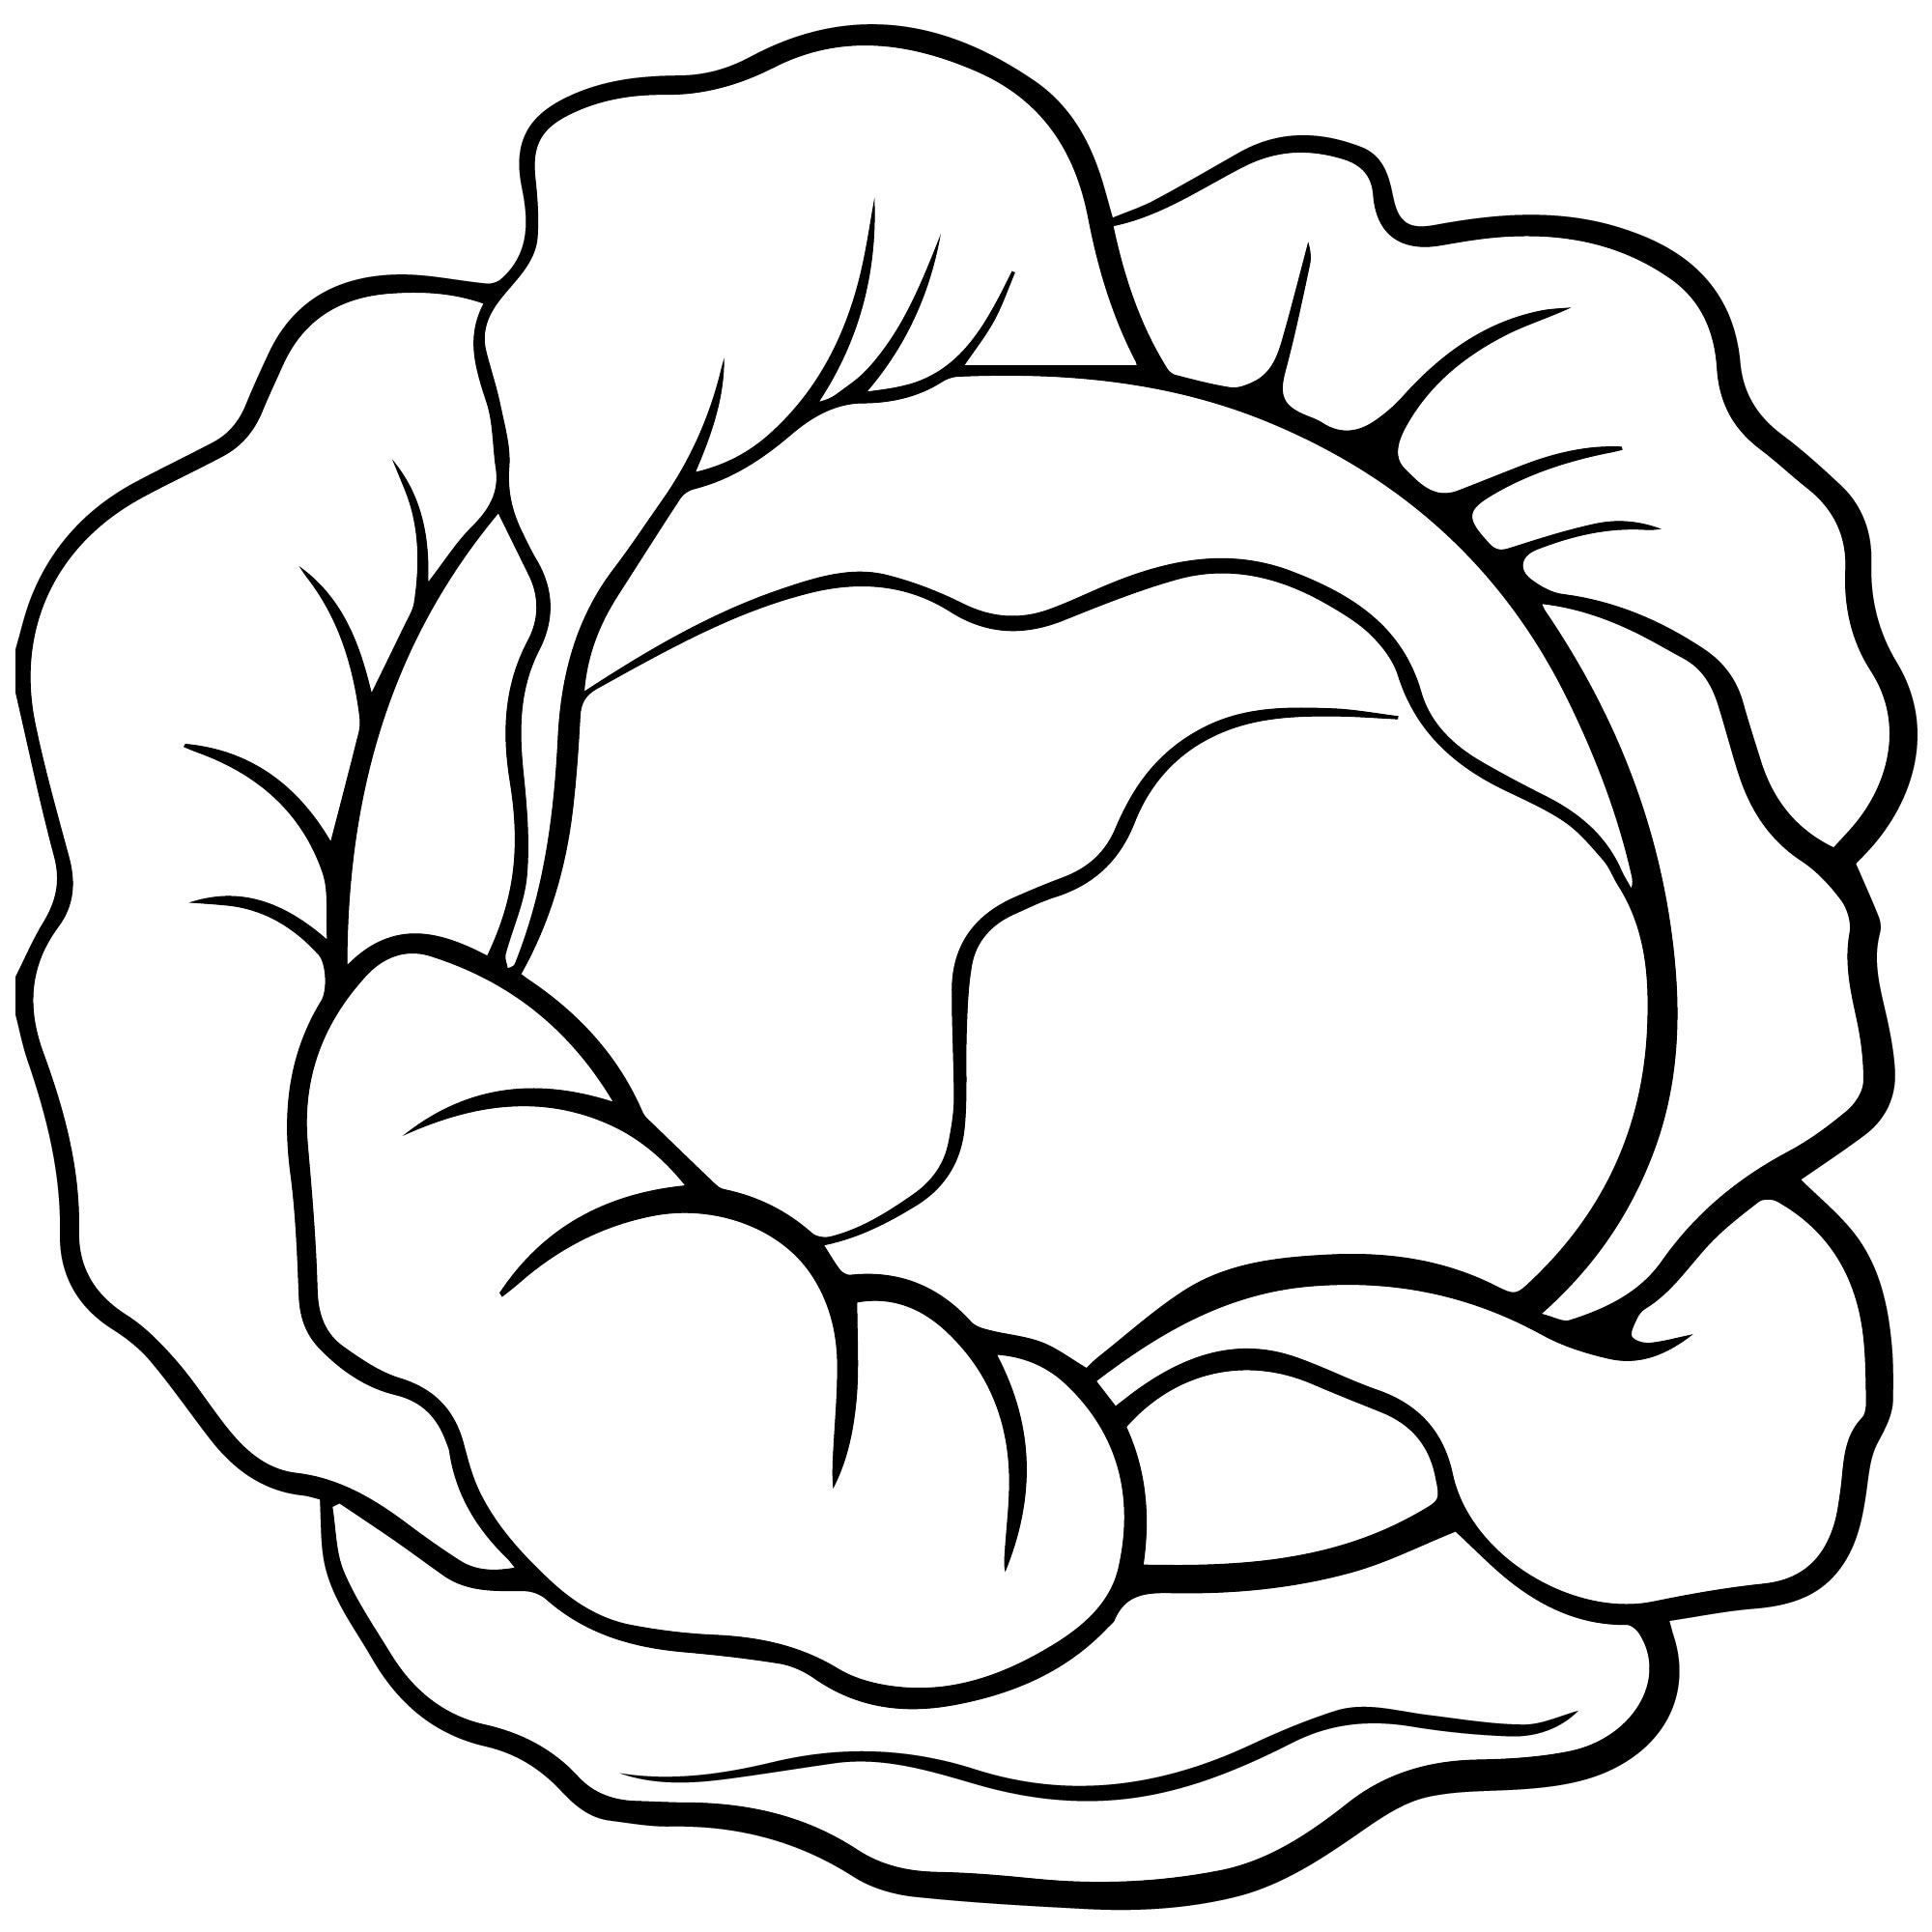 An interesting cabbage coloring book for children 3-4 years old